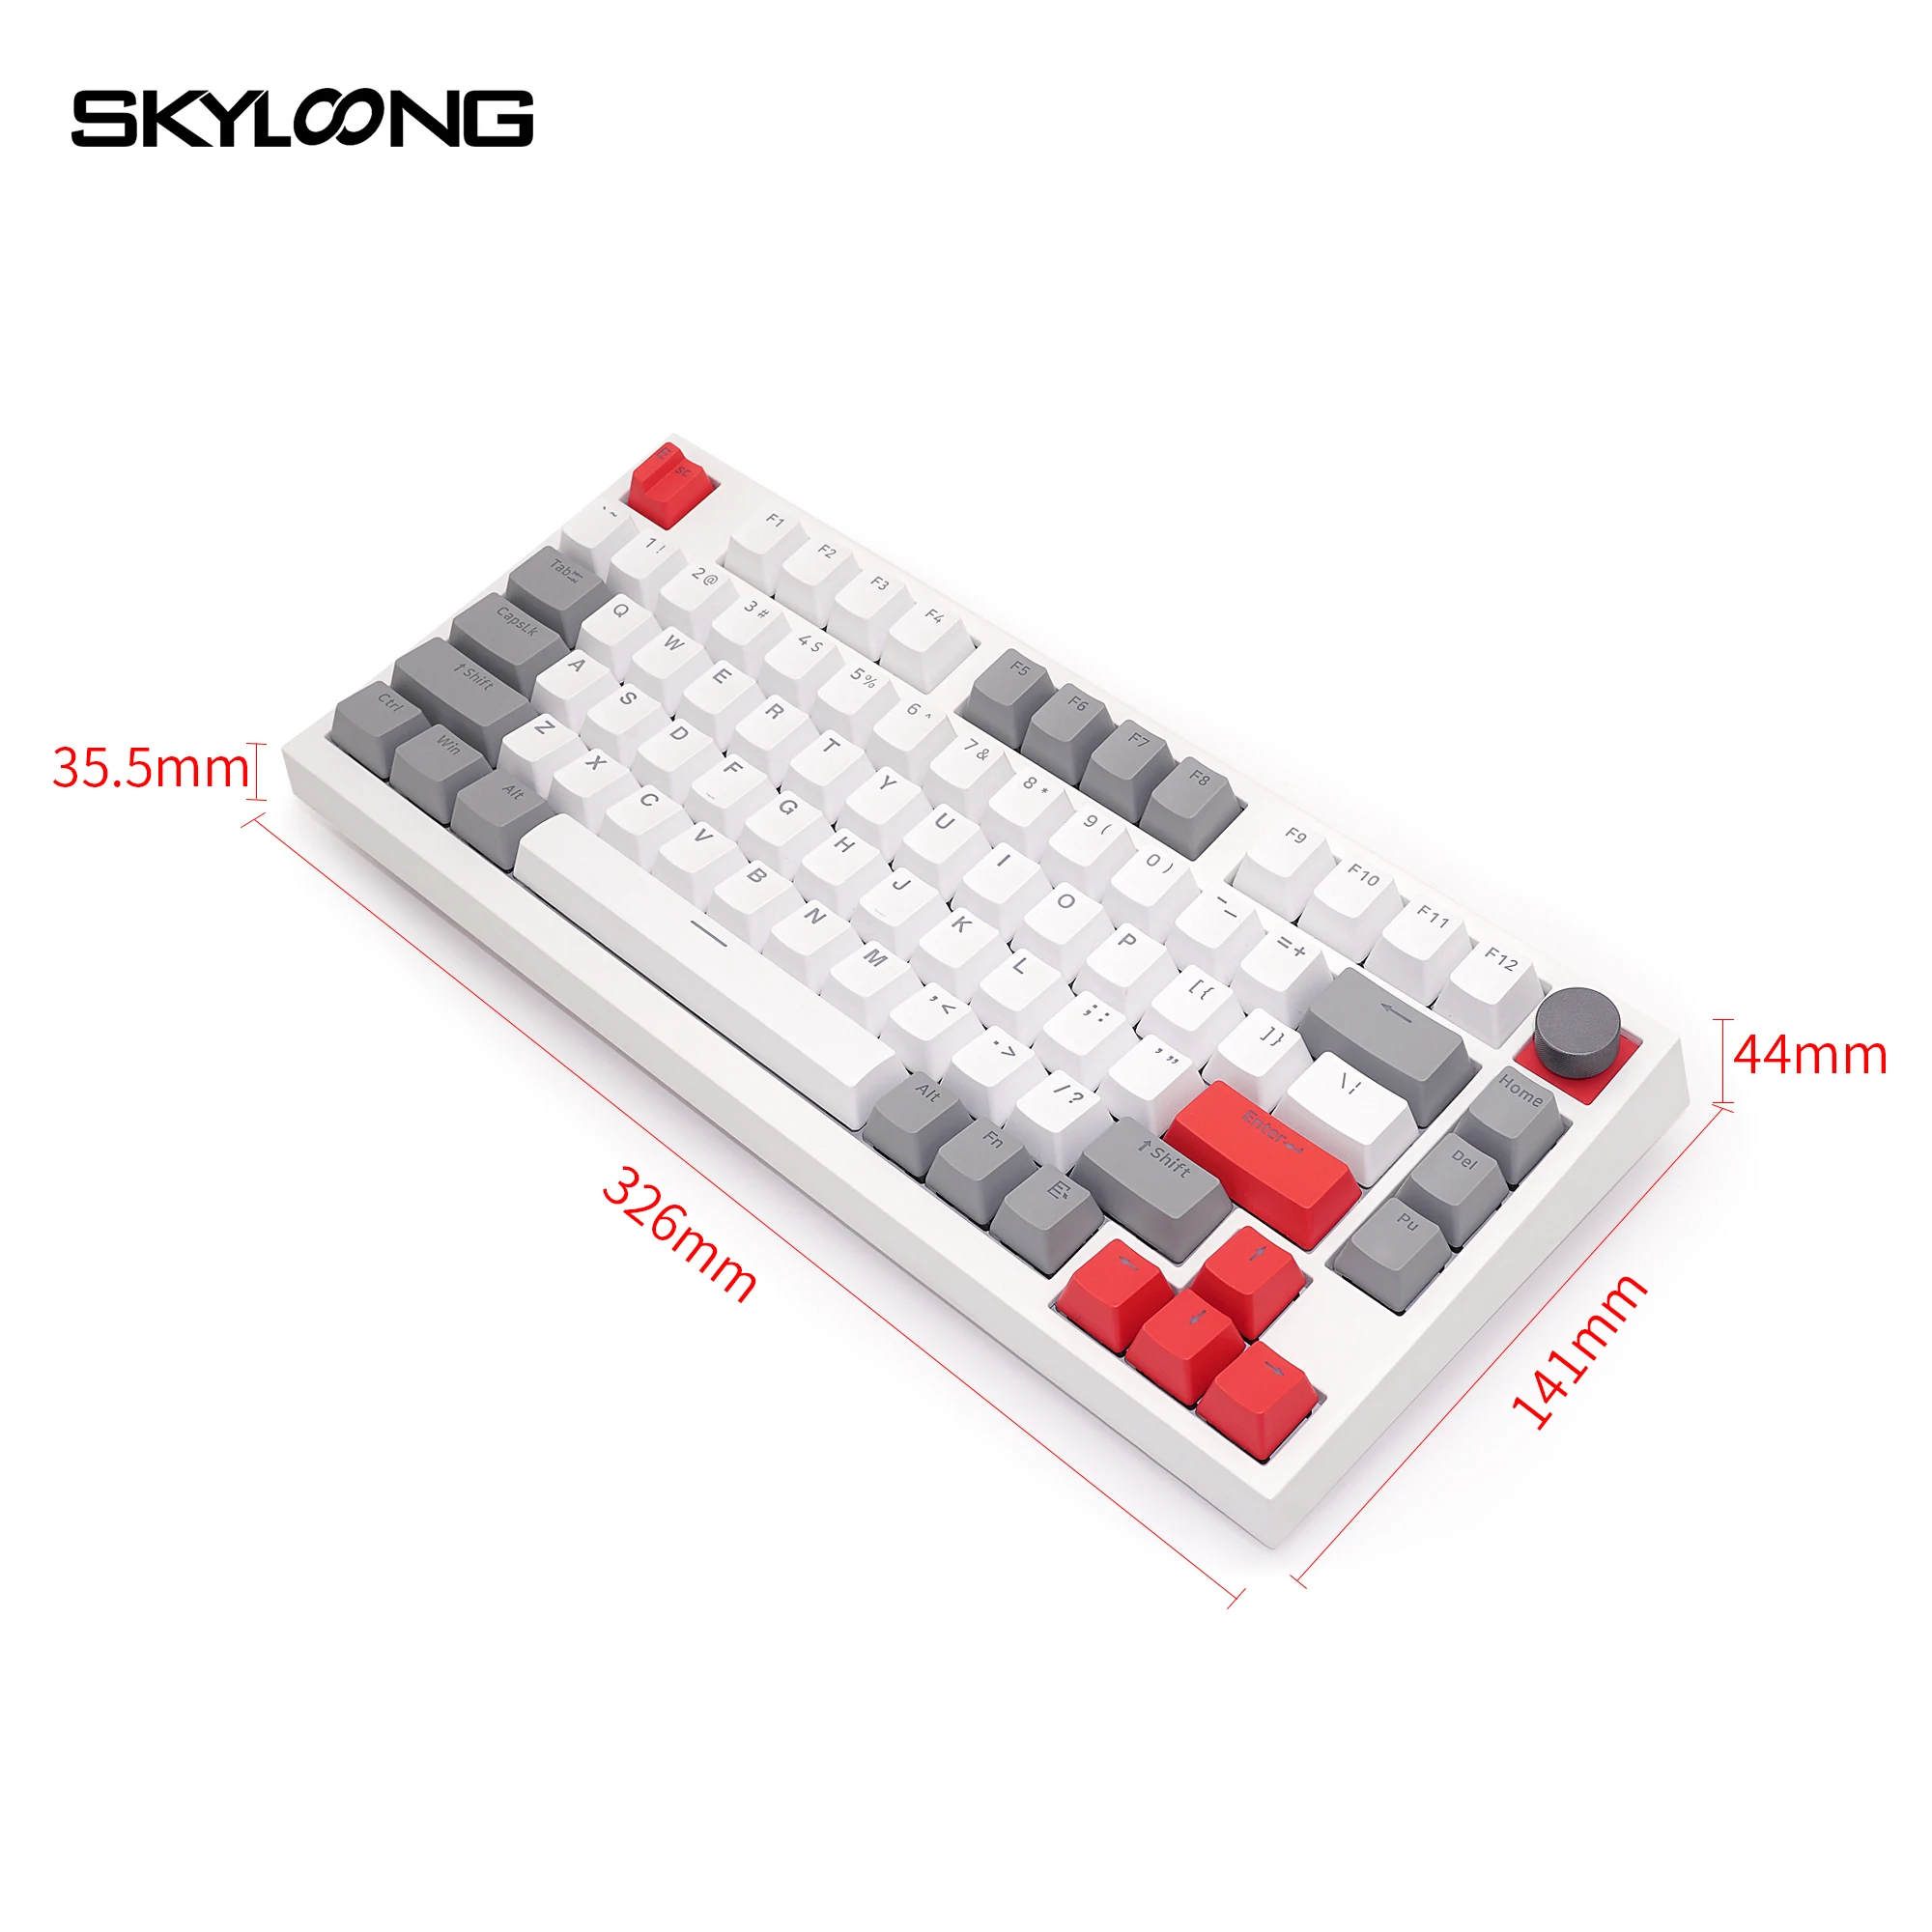 Skyloong GK75 RGB Mechanical Keyboard Switch Hot Swappable PBT Key Cap Game Wired 2.4G Wireless Gasket-like Programmable WIN/MAC